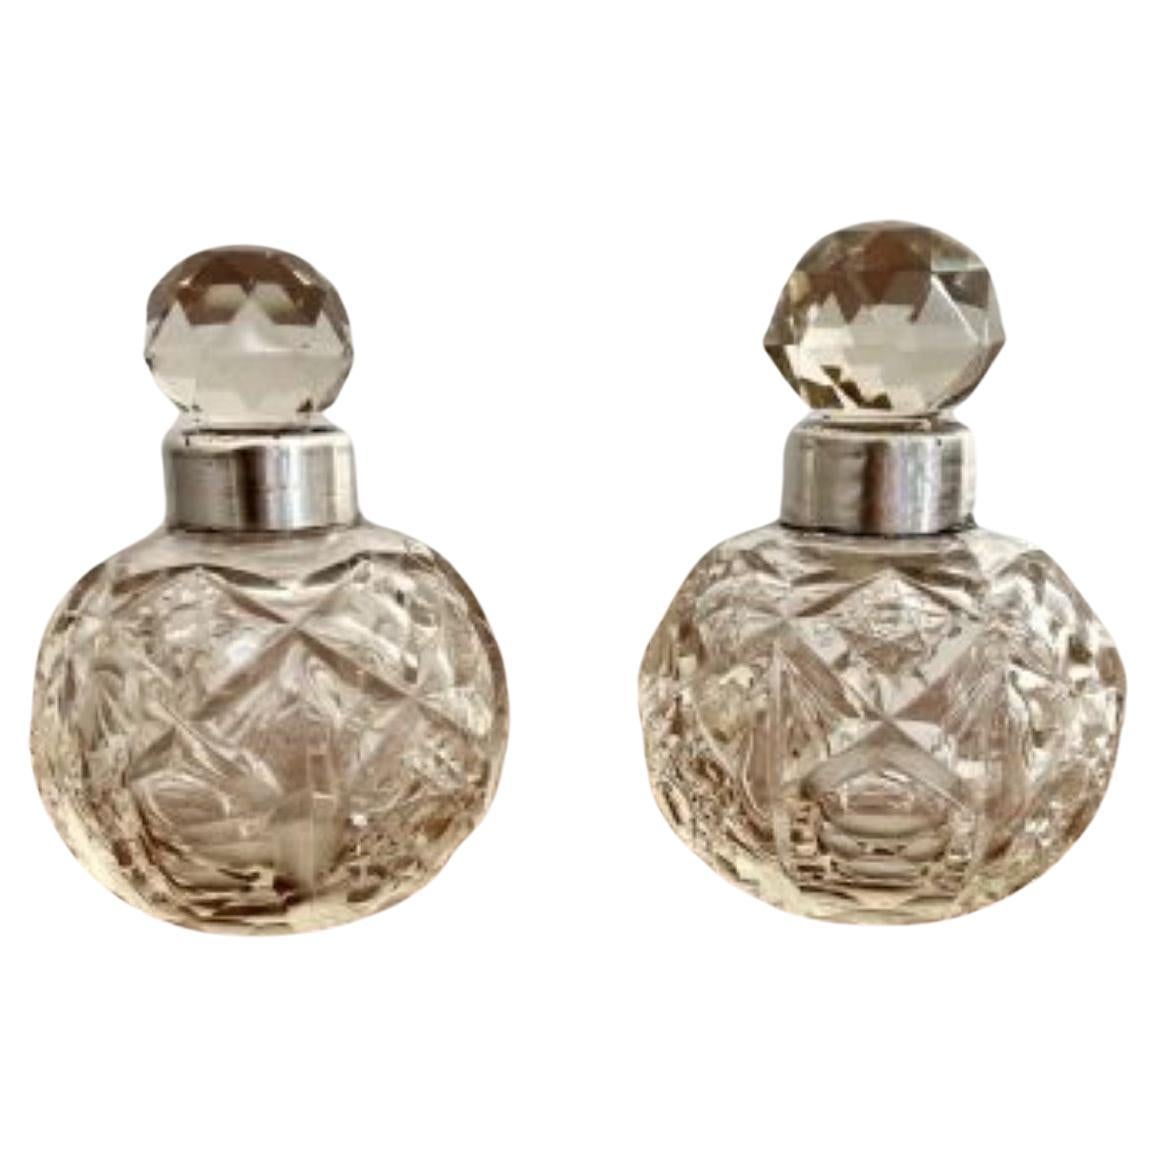 Quality pair of antique Edwardian silver collar & cut glass scent bottles 